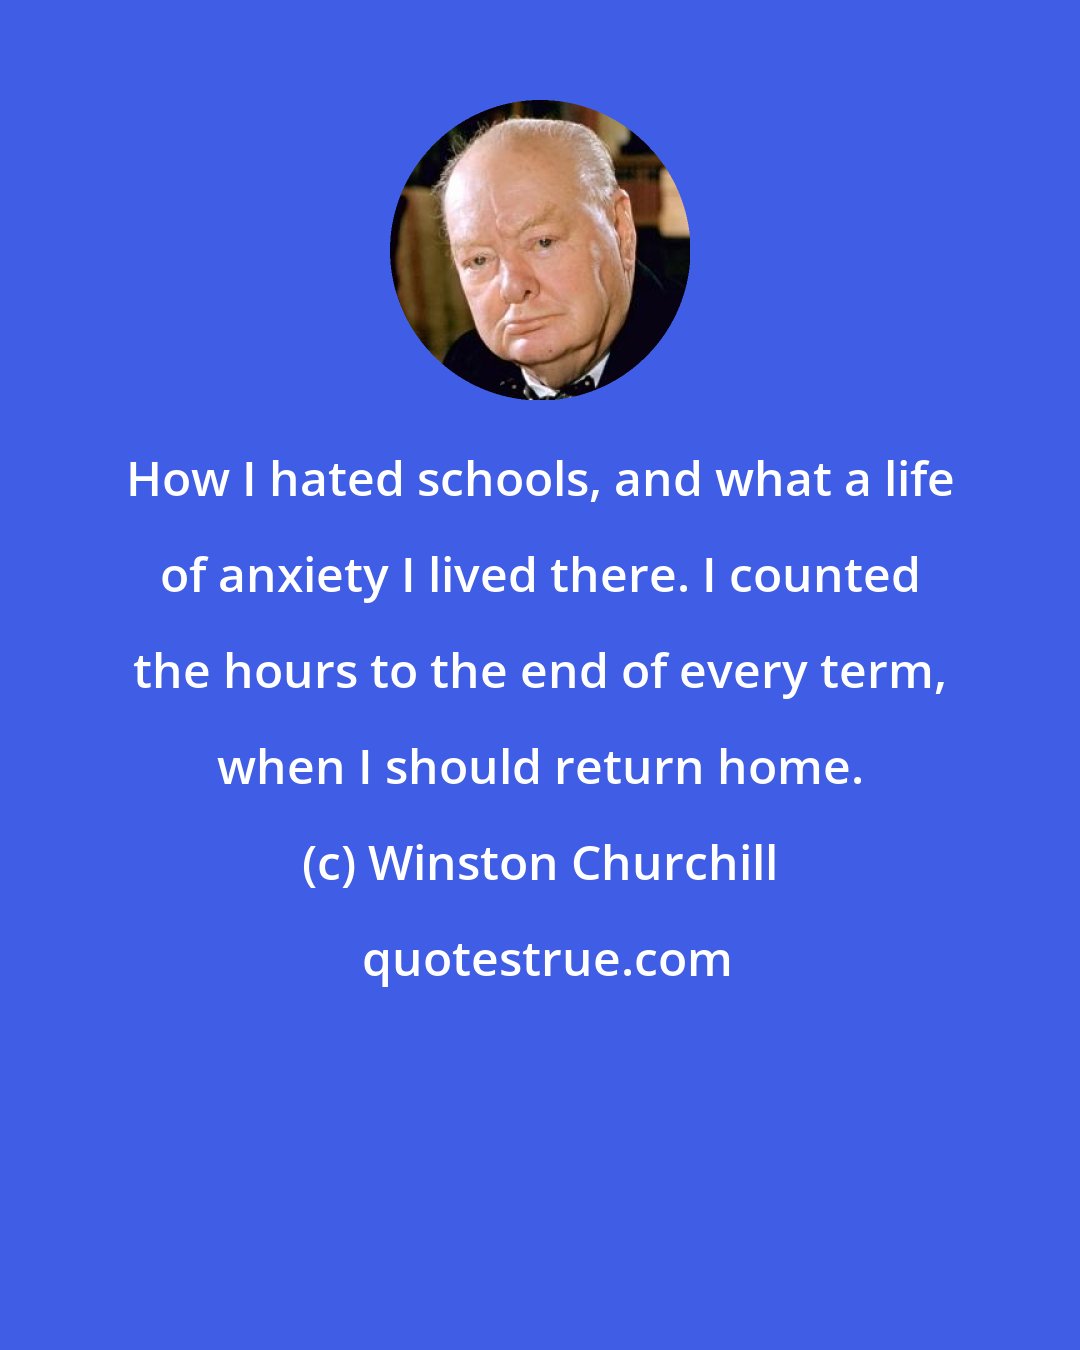 Winston Churchill: How I hated schools, and what a life of anxiety I lived there. I counted the hours to the end of every term, when I should return home.